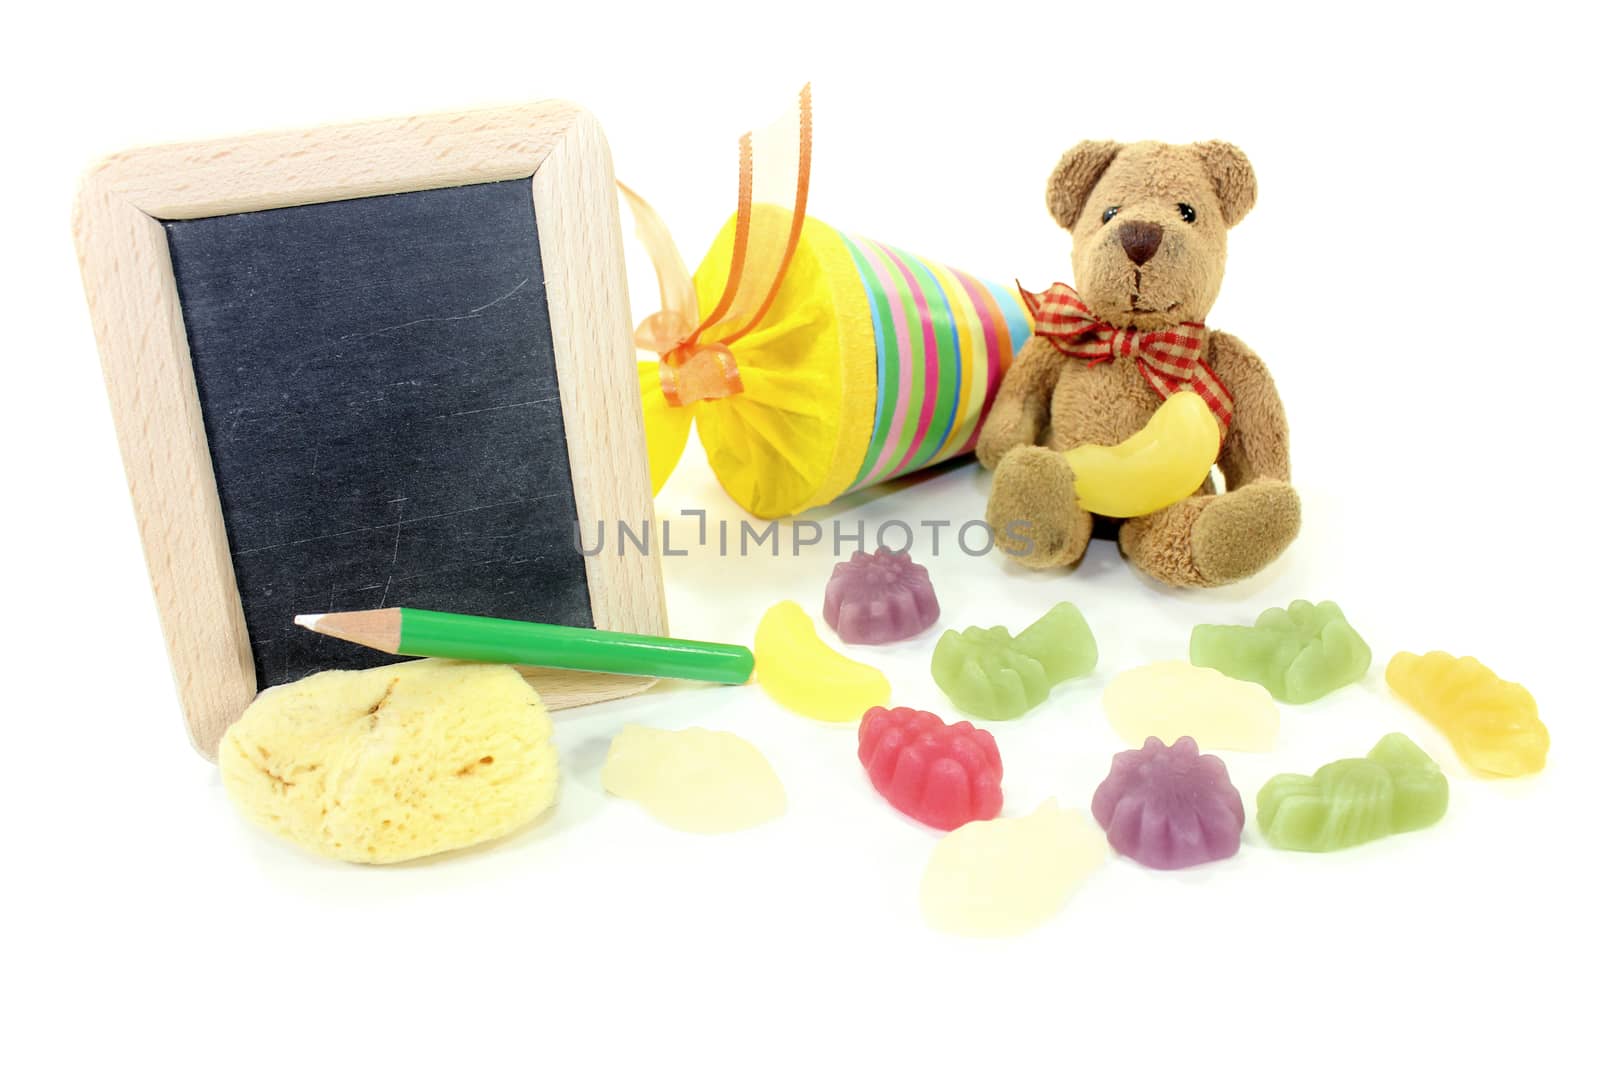 Back to School with Teddy and blackboard by discovery